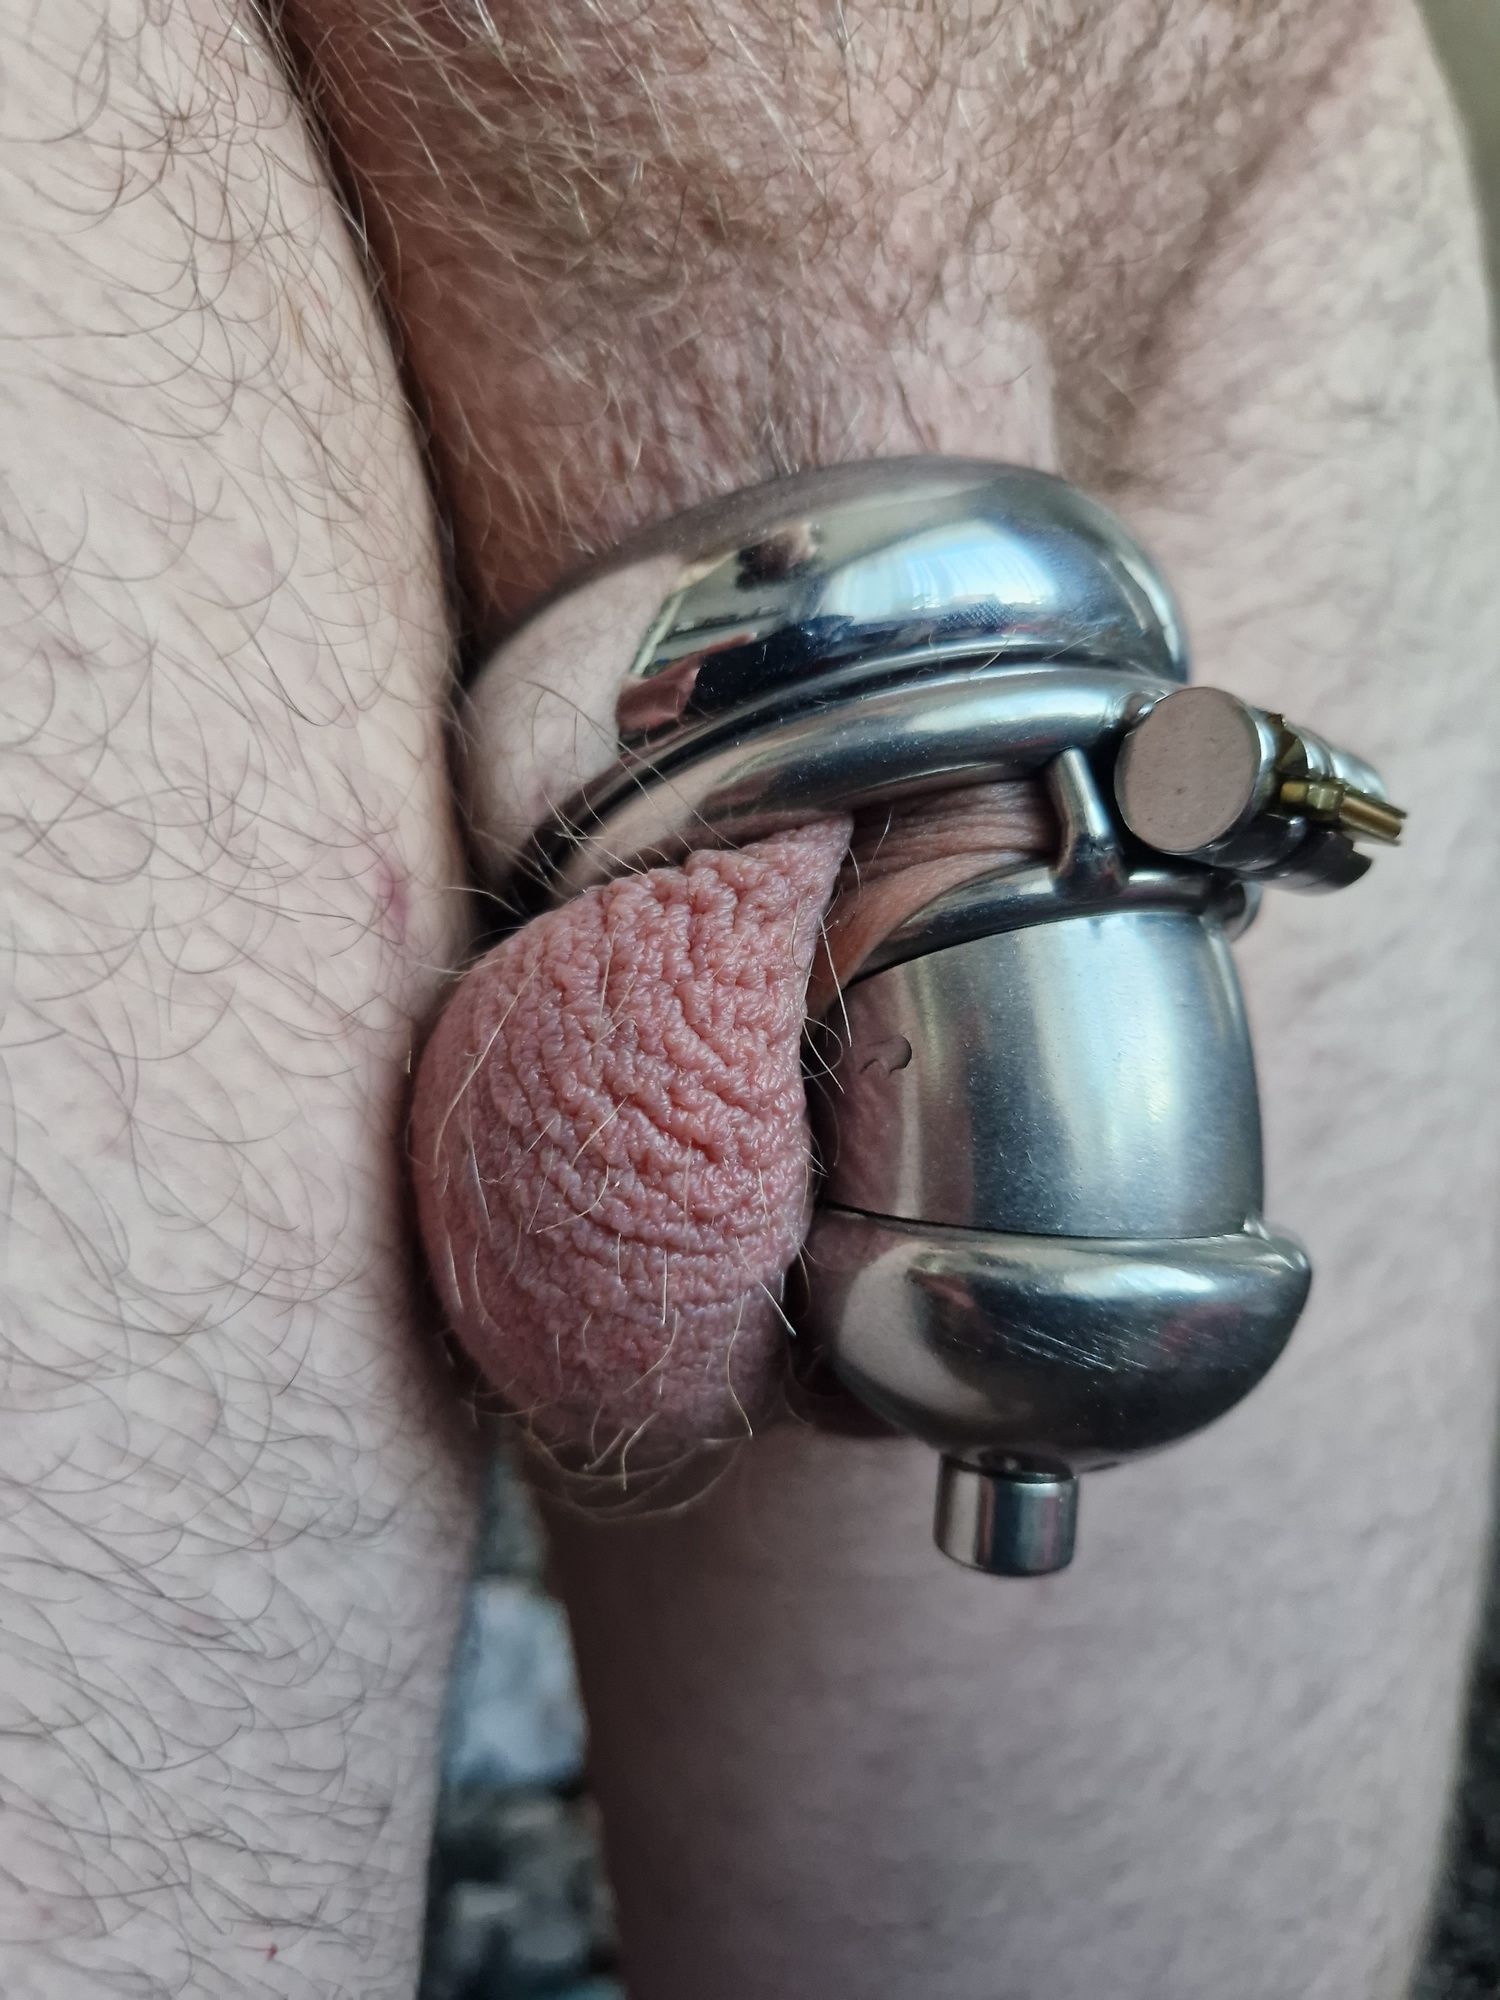 I love my chastity cage